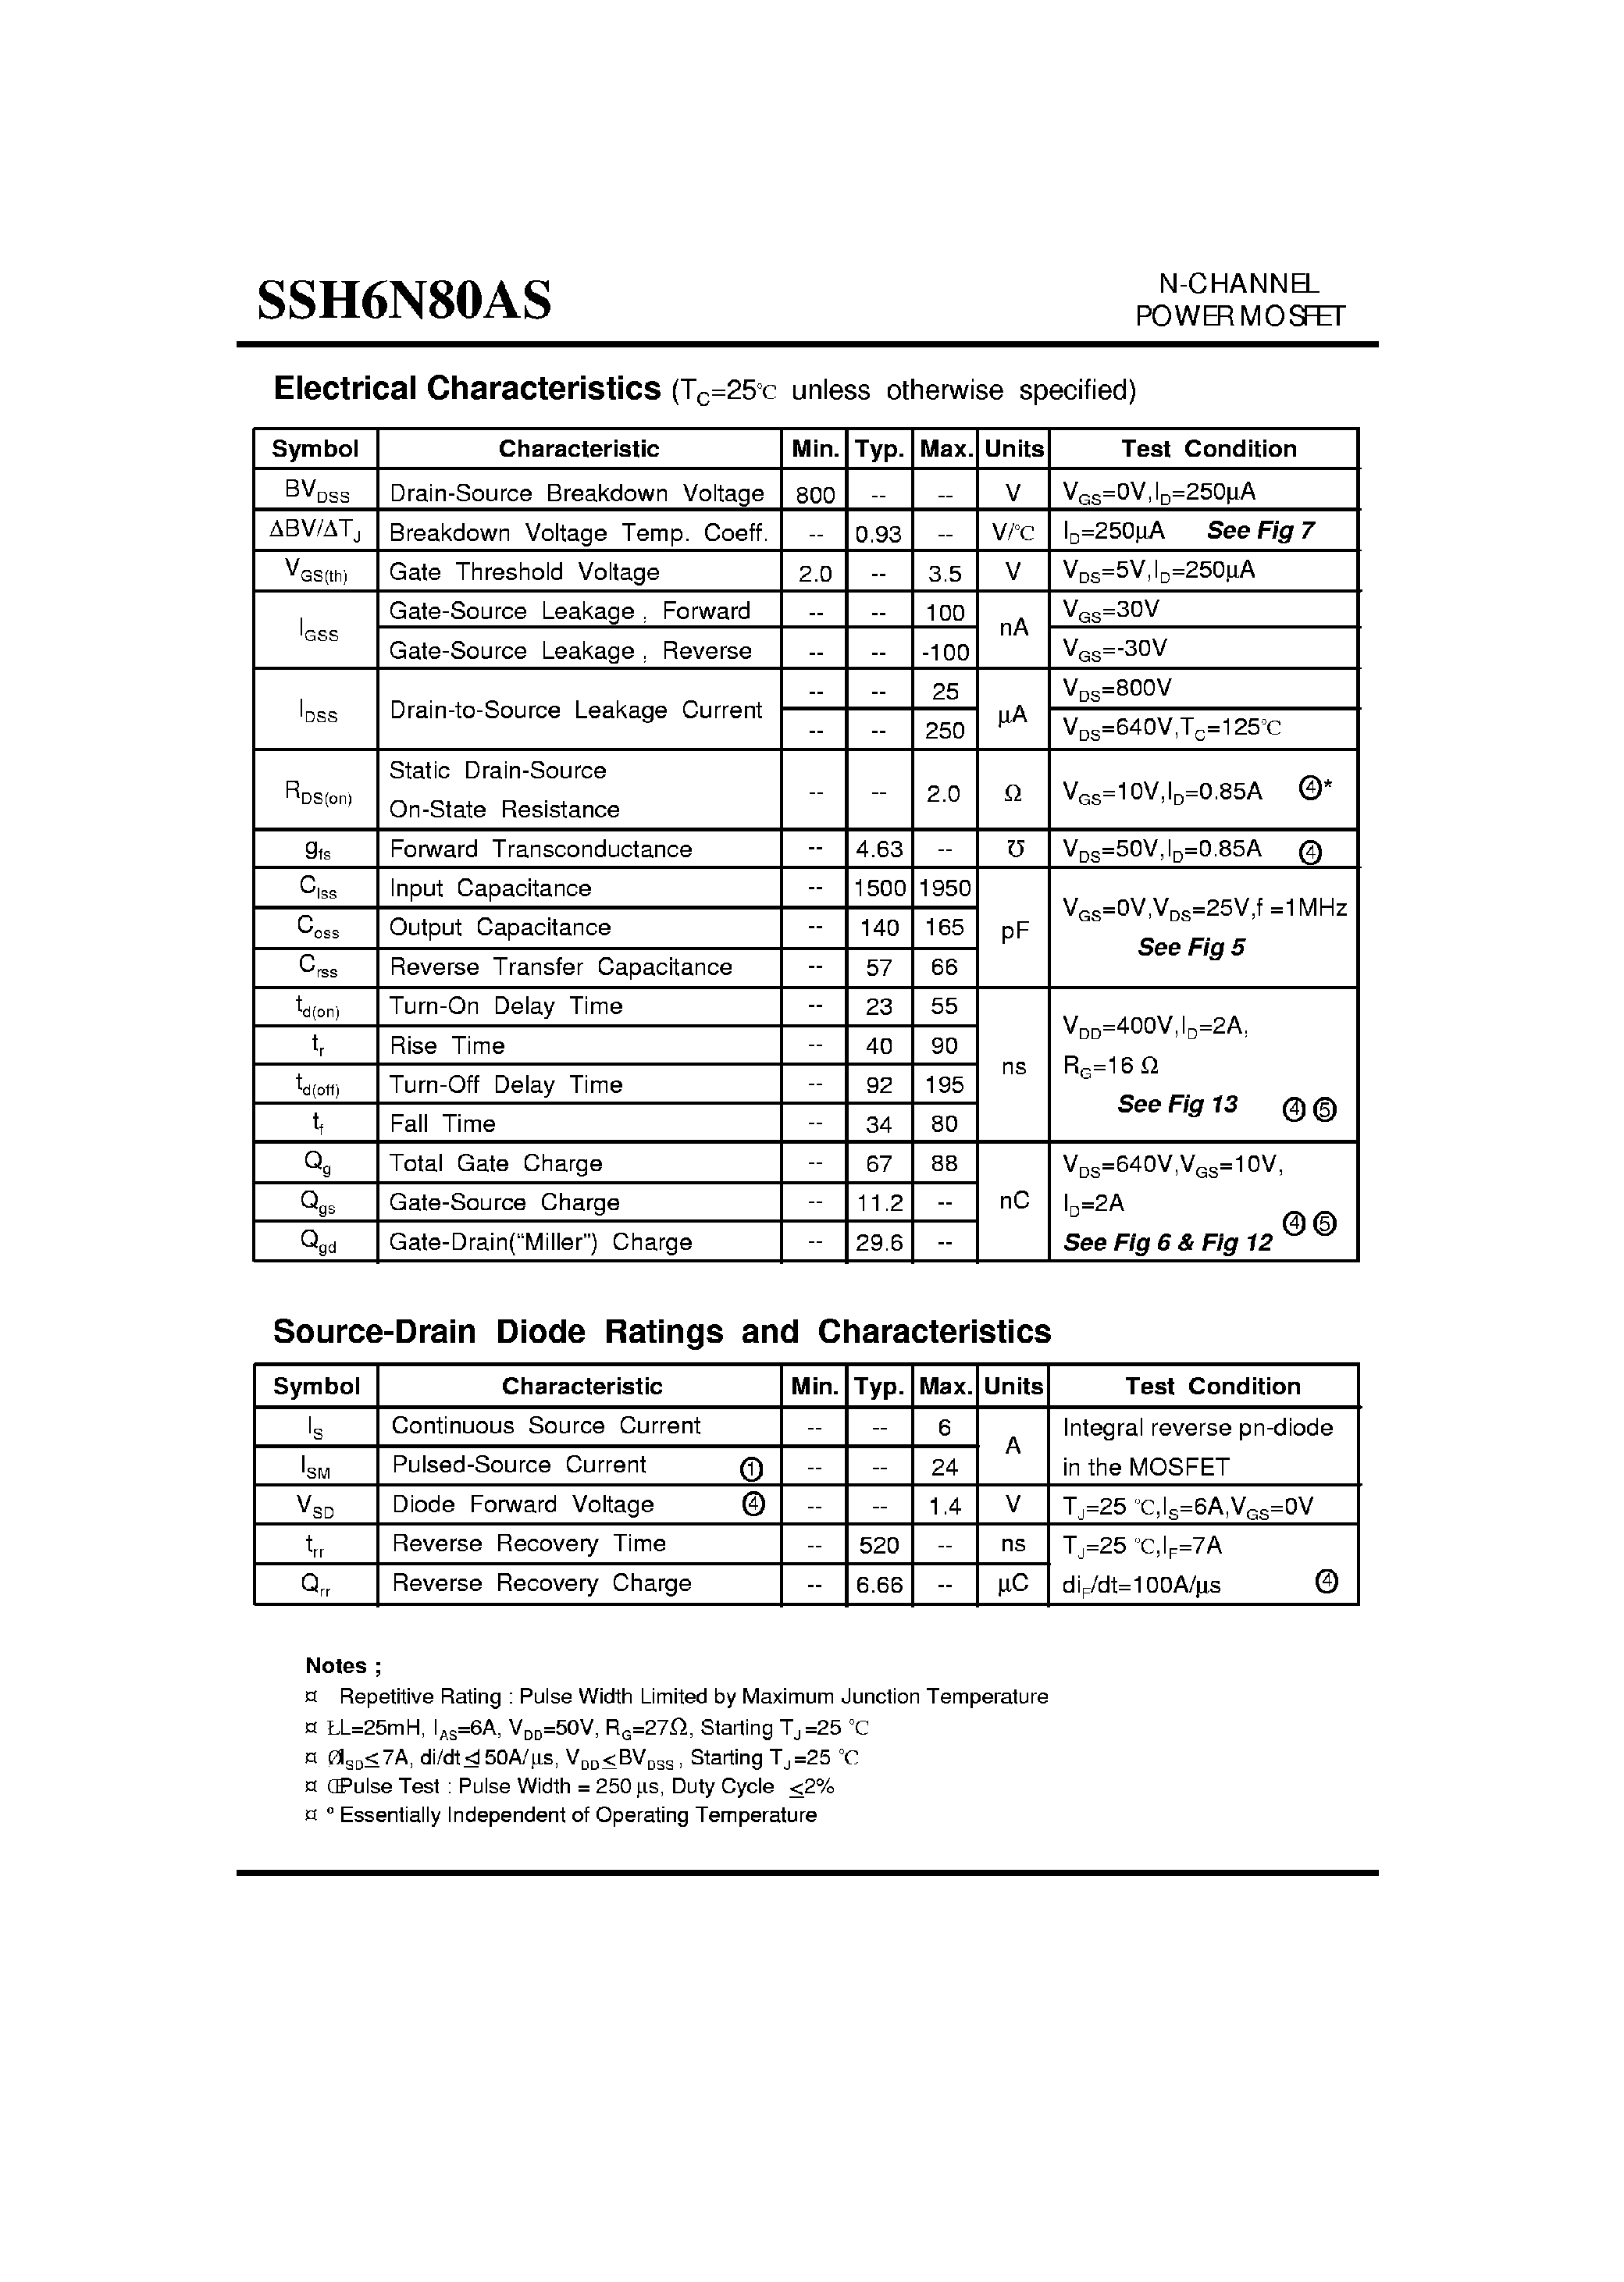 Datasheet SSH6N80AS - Advanced Power MOSFET page 2